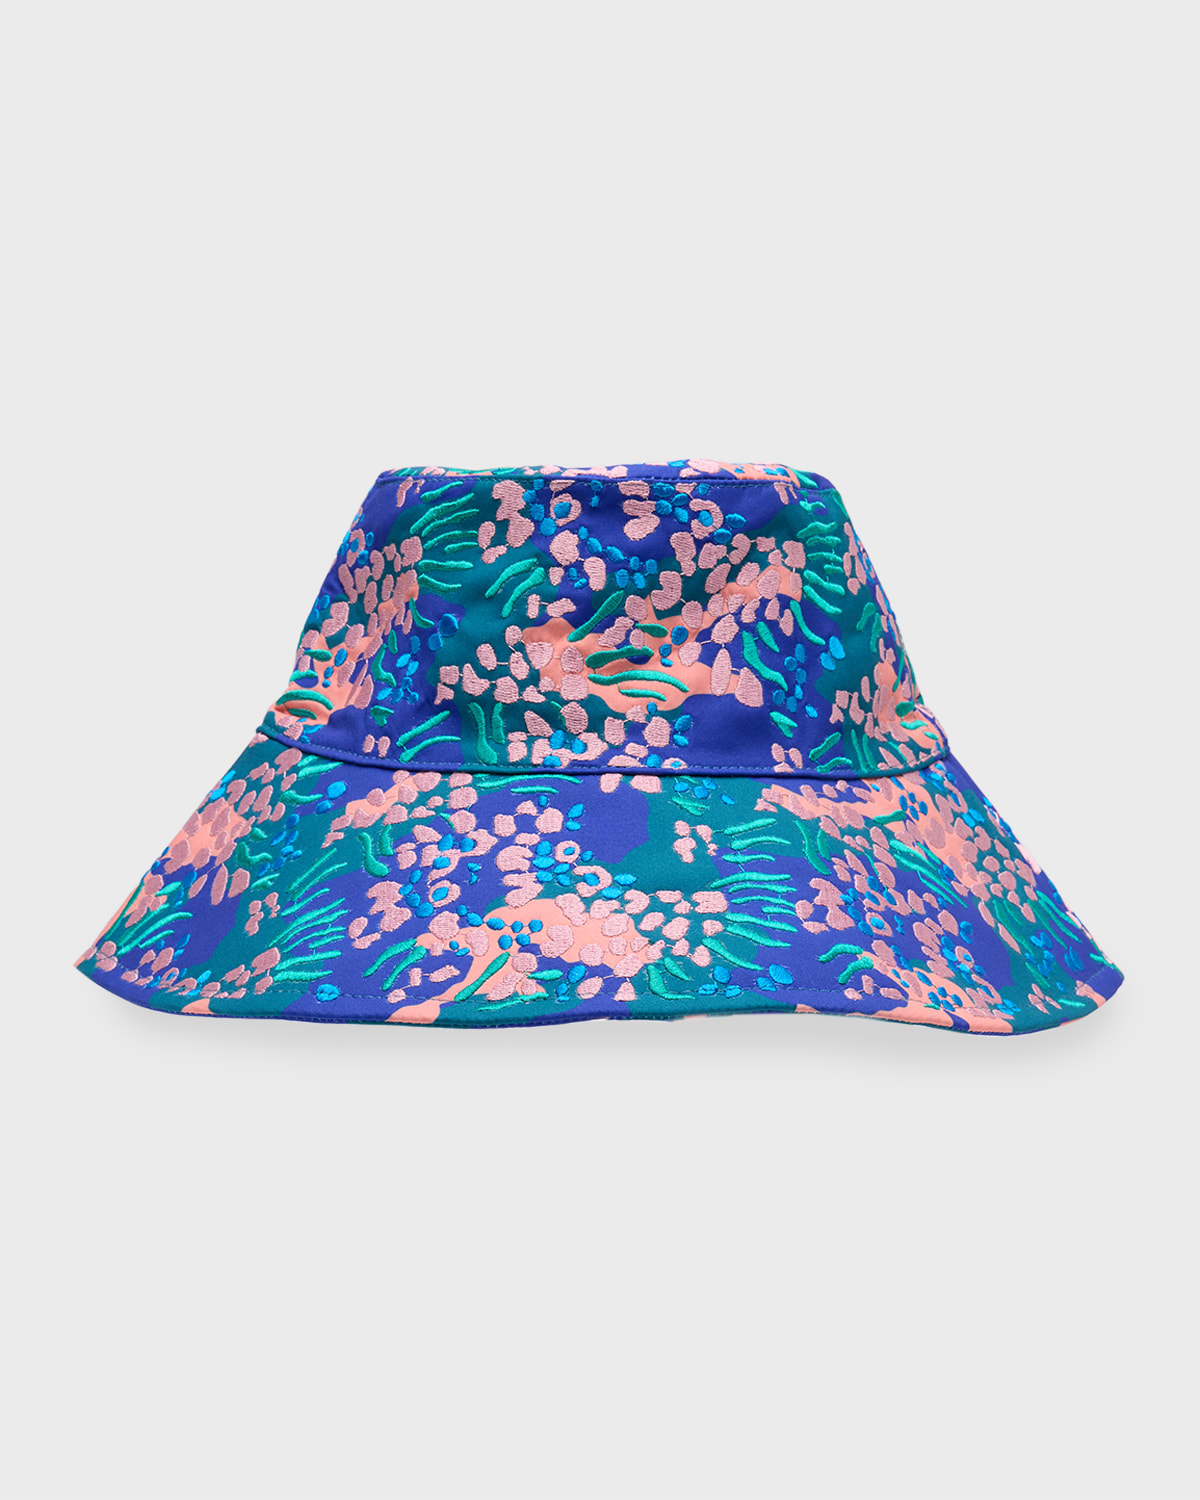 Lele Sadoughi Embroidered Bucket Hat In Sea Reef